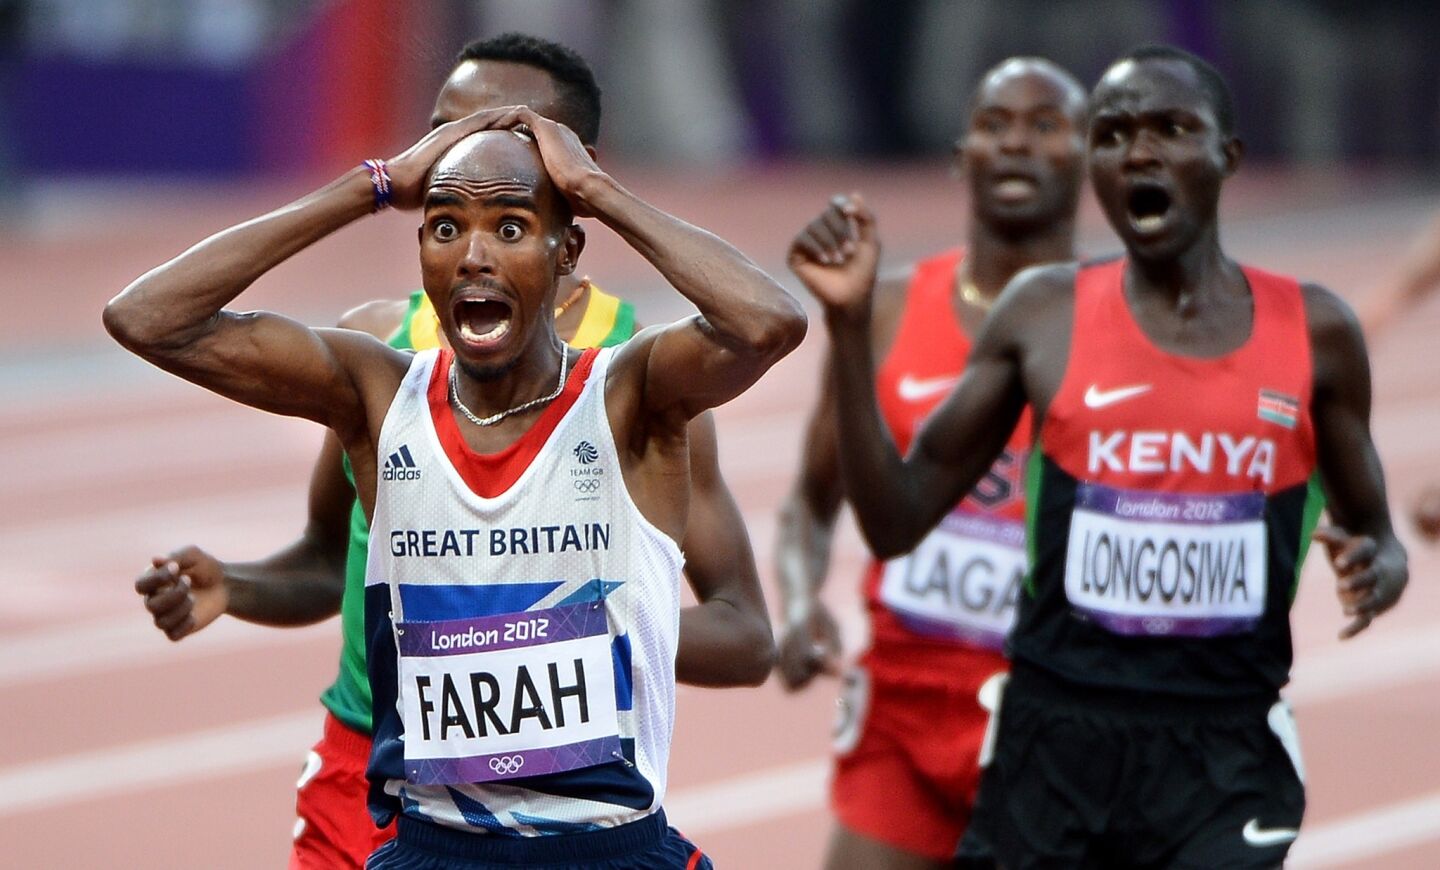 Who was more shocked, the delirious crowd watching the race? Or Farah, whose win completed the watching-paint-dry double of 5,000 meters and 10,000 meters?